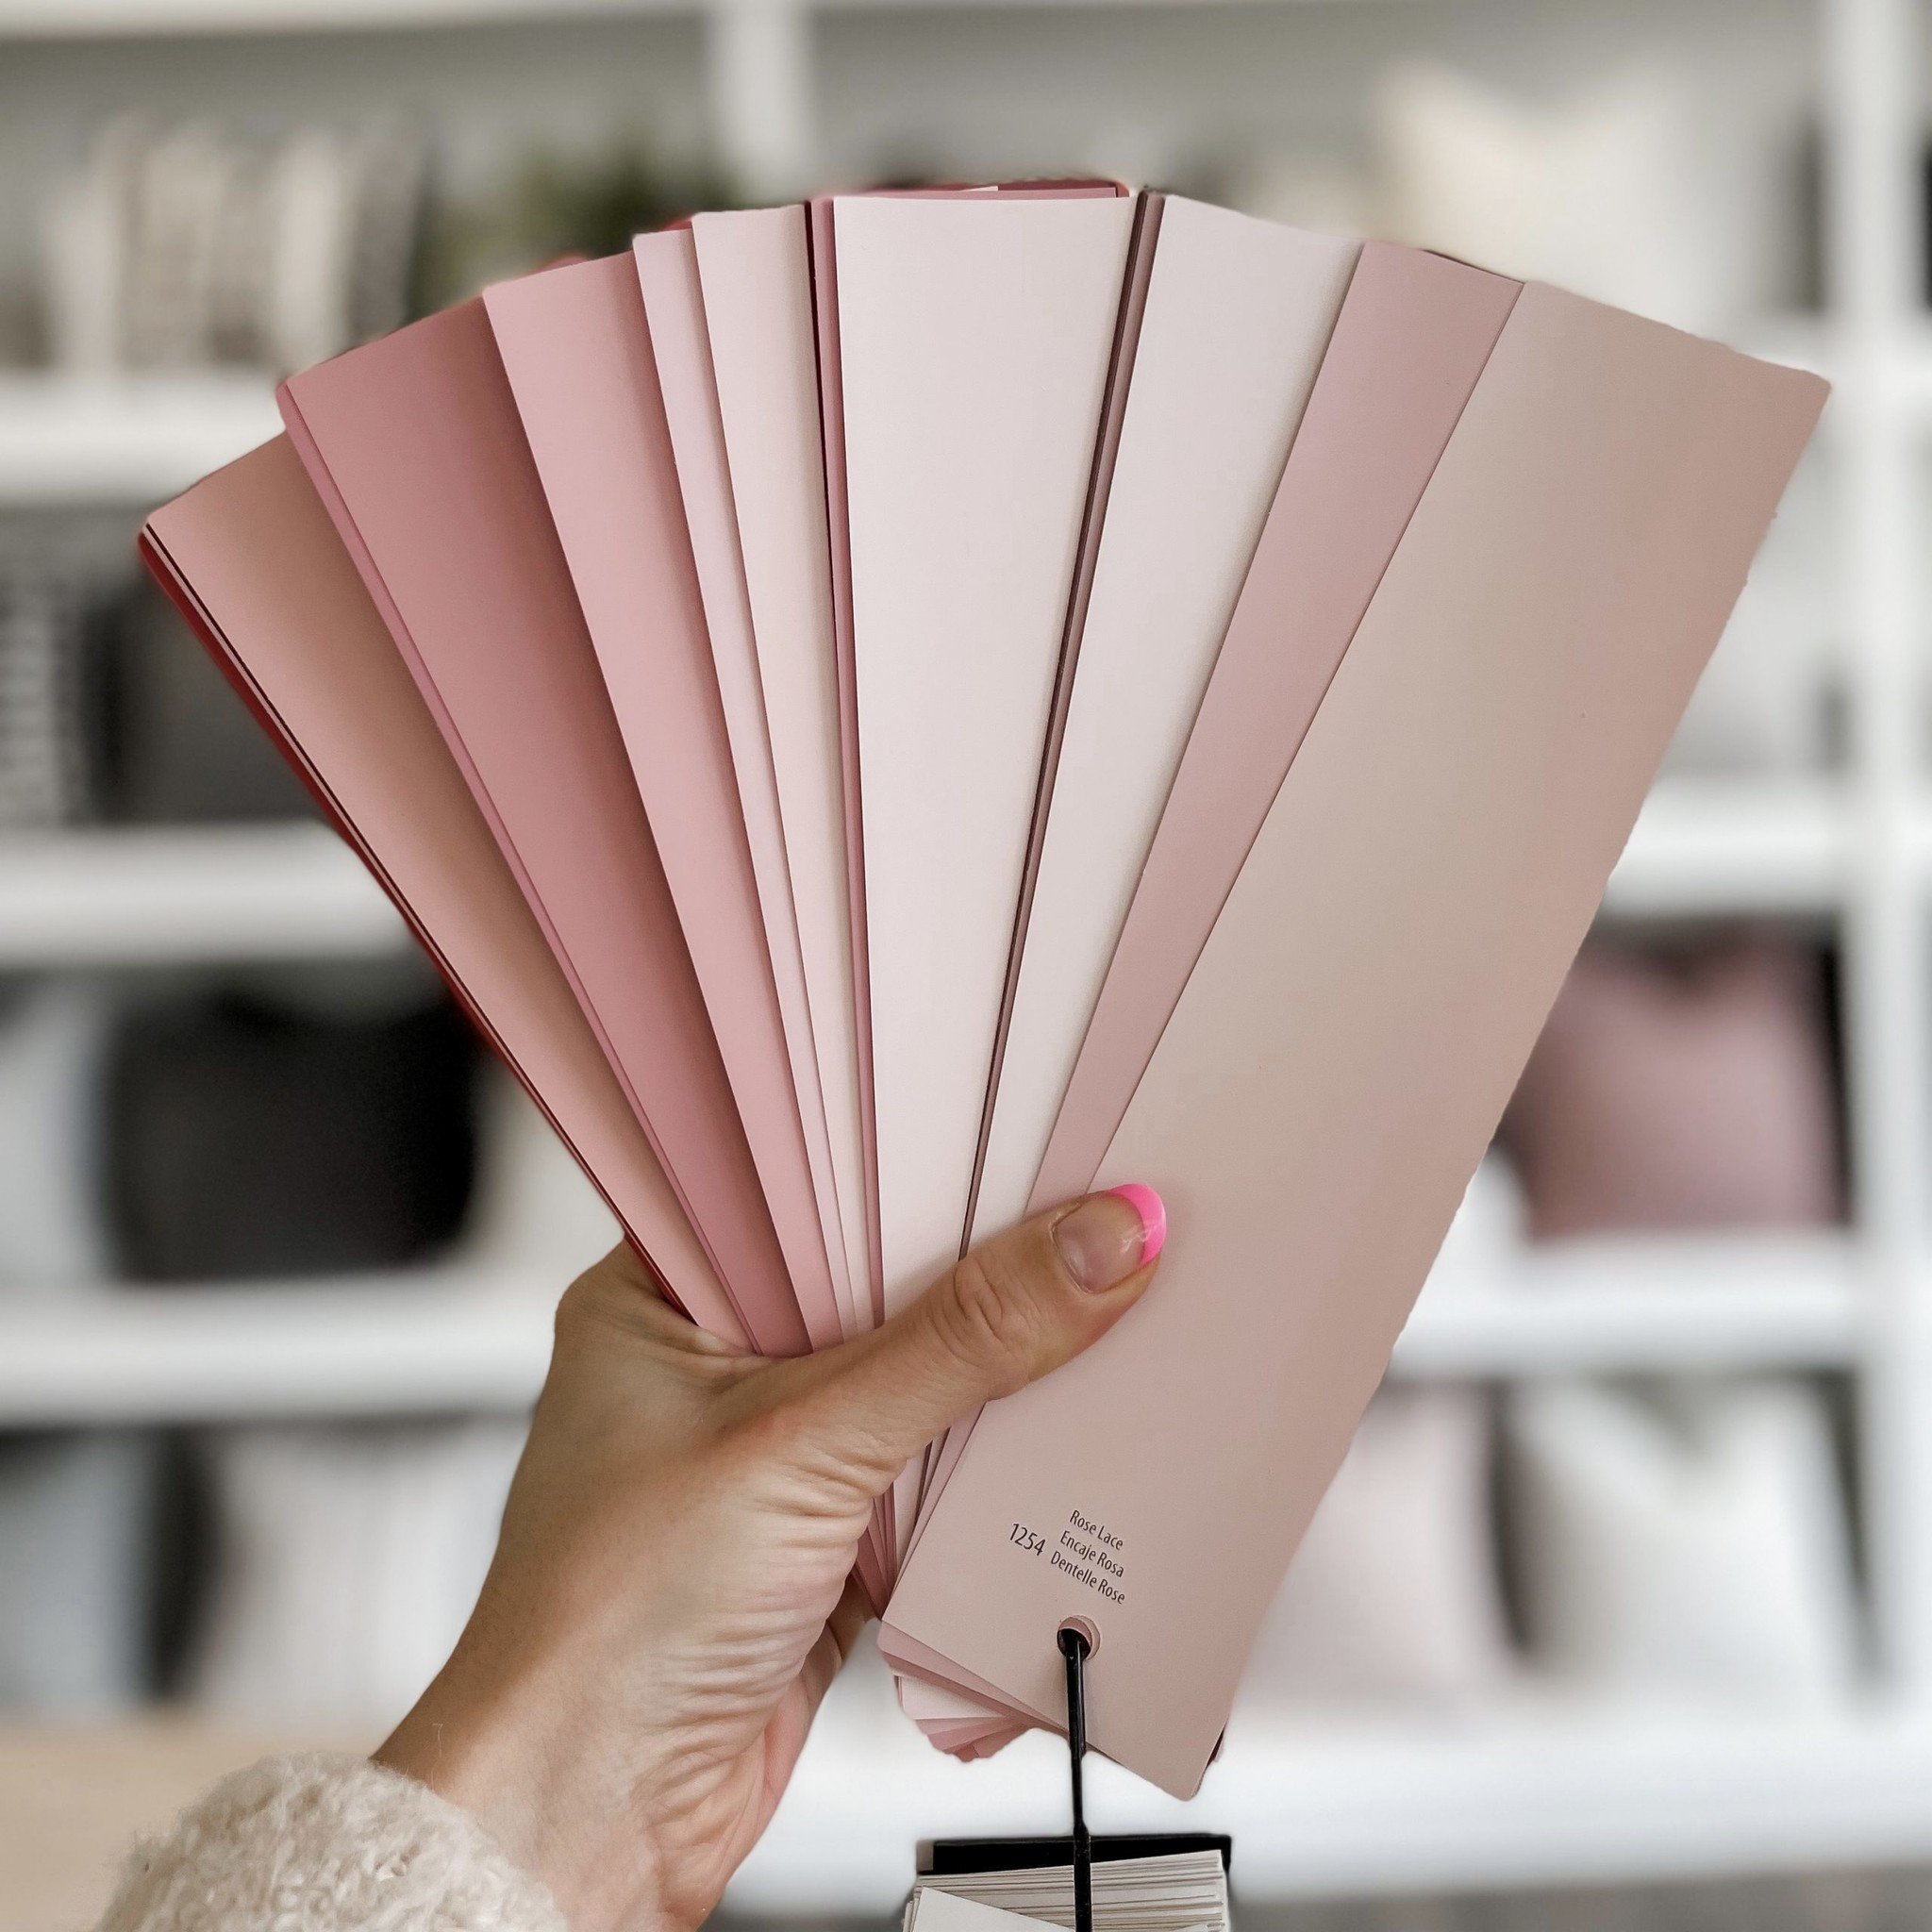 https://cdn.shoplightspeed.com/shops/660571/files/47586633/our-favorite-pink-paint-colors-how-to-use-them.jpg